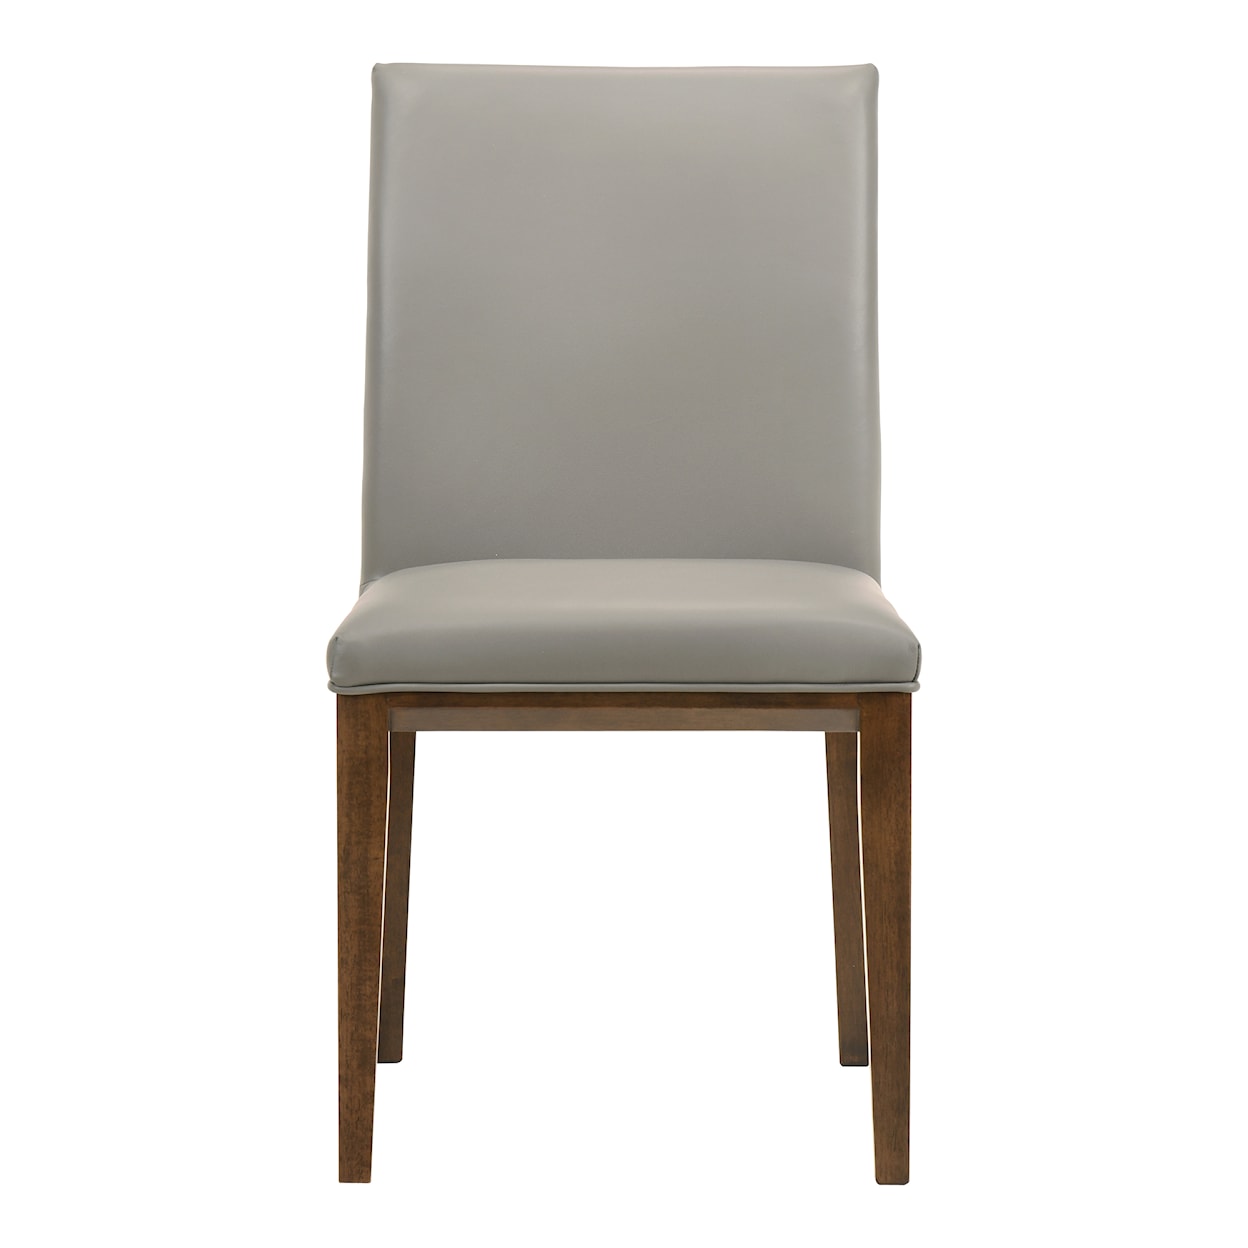 Moe's Home Collection Frankie Frankie Dining Chair Grey-M2